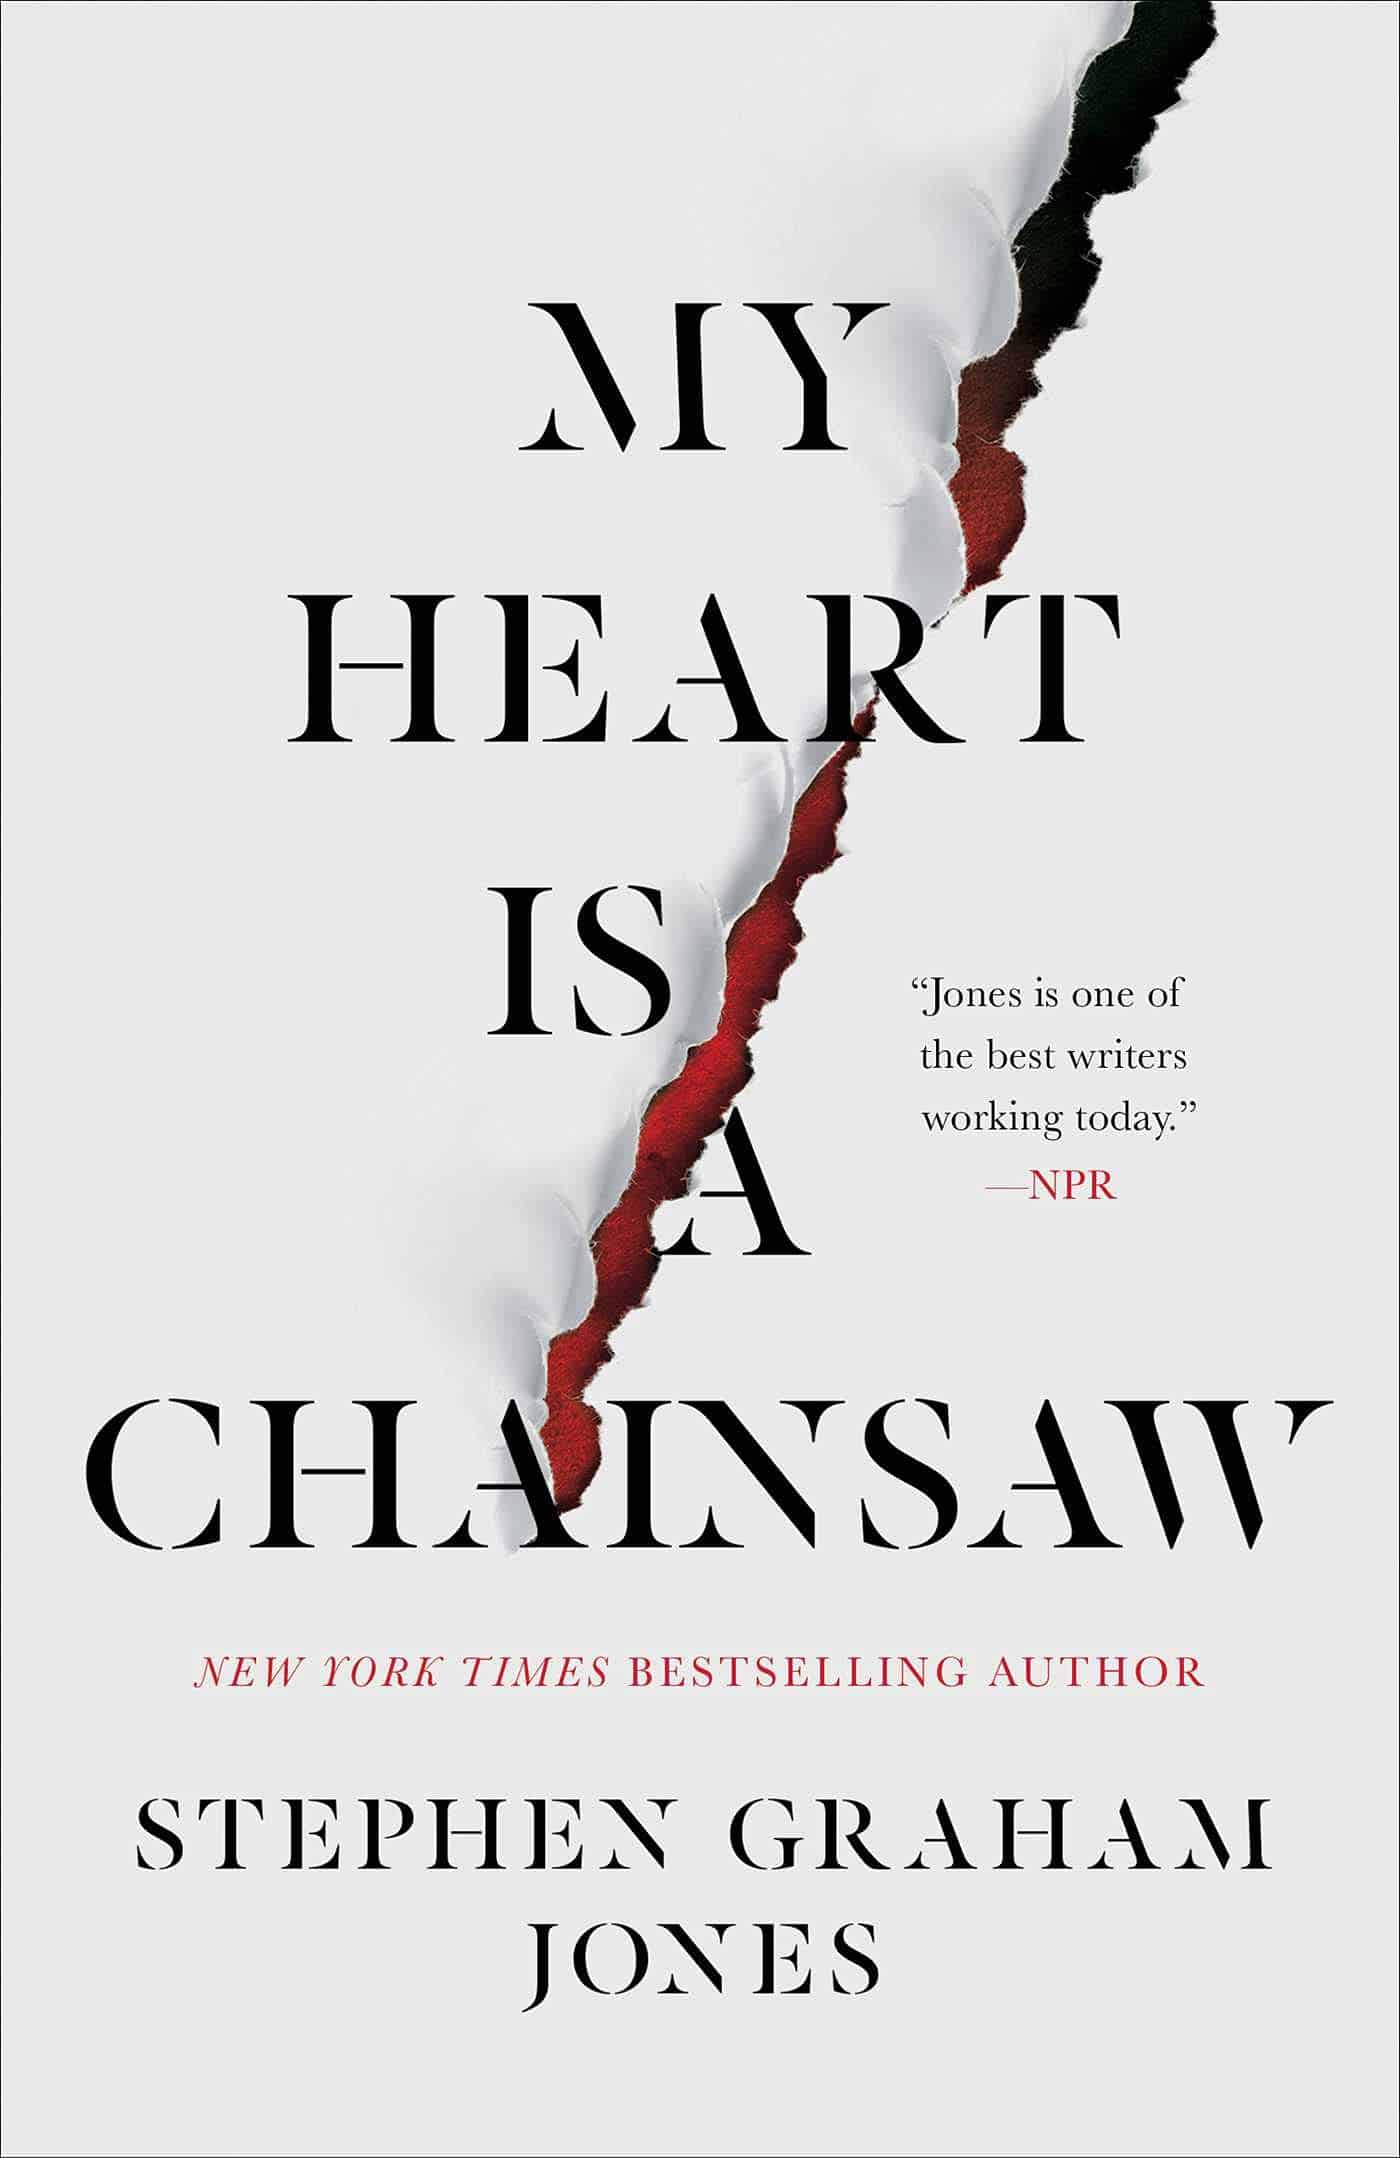 My Heart Is a Chainsaw by Stephen Graham Jones